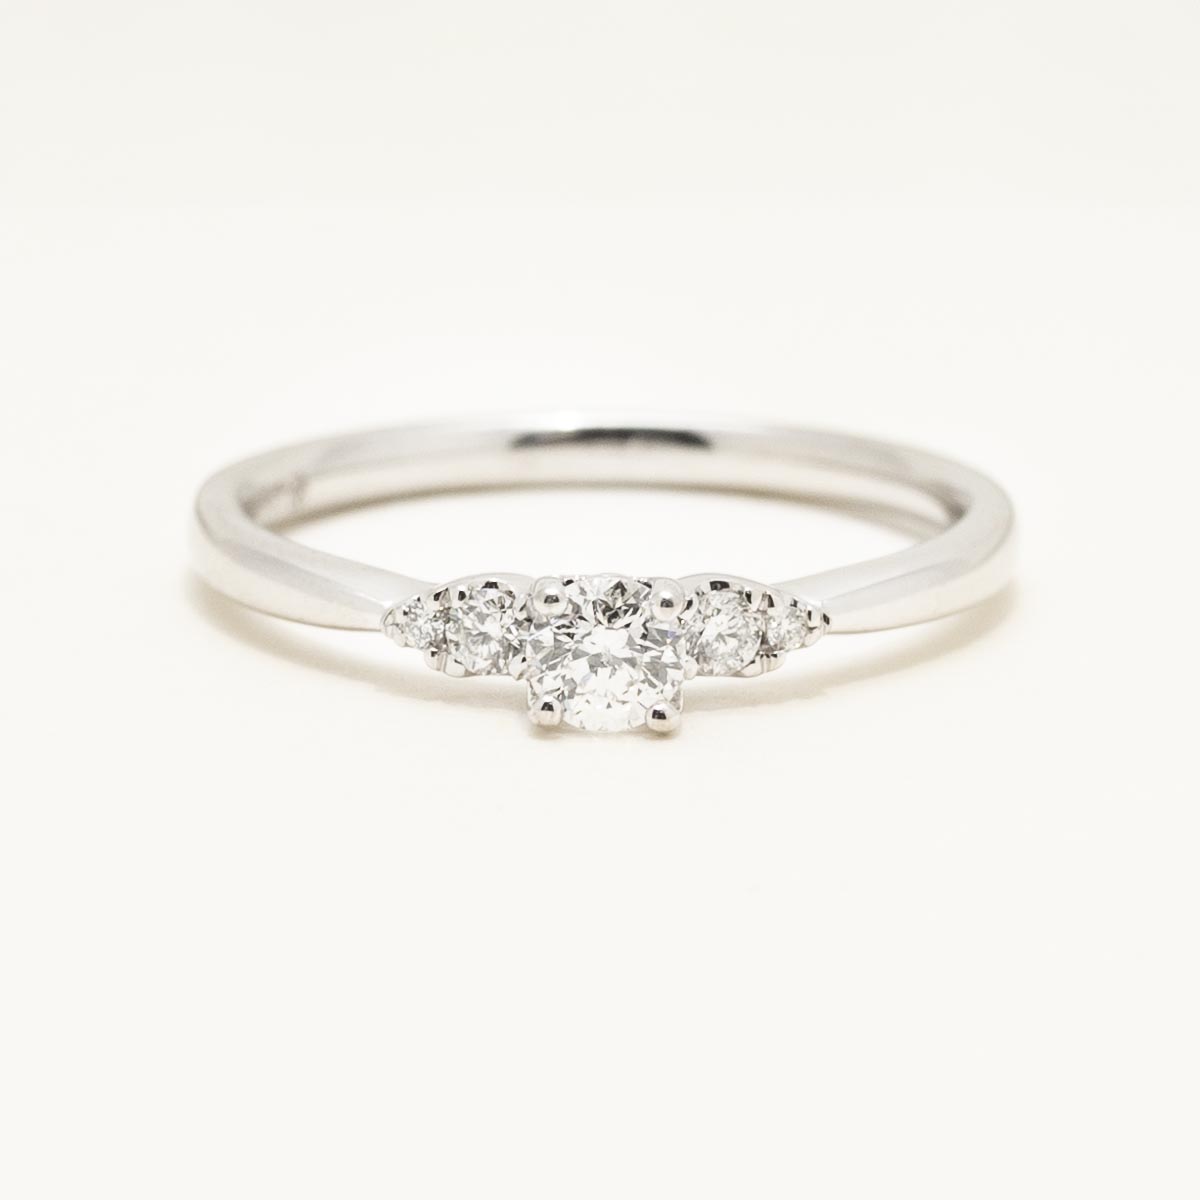 Northern Star Diamond Engagement Ring in 14kt White Gold (1/3ct tw)